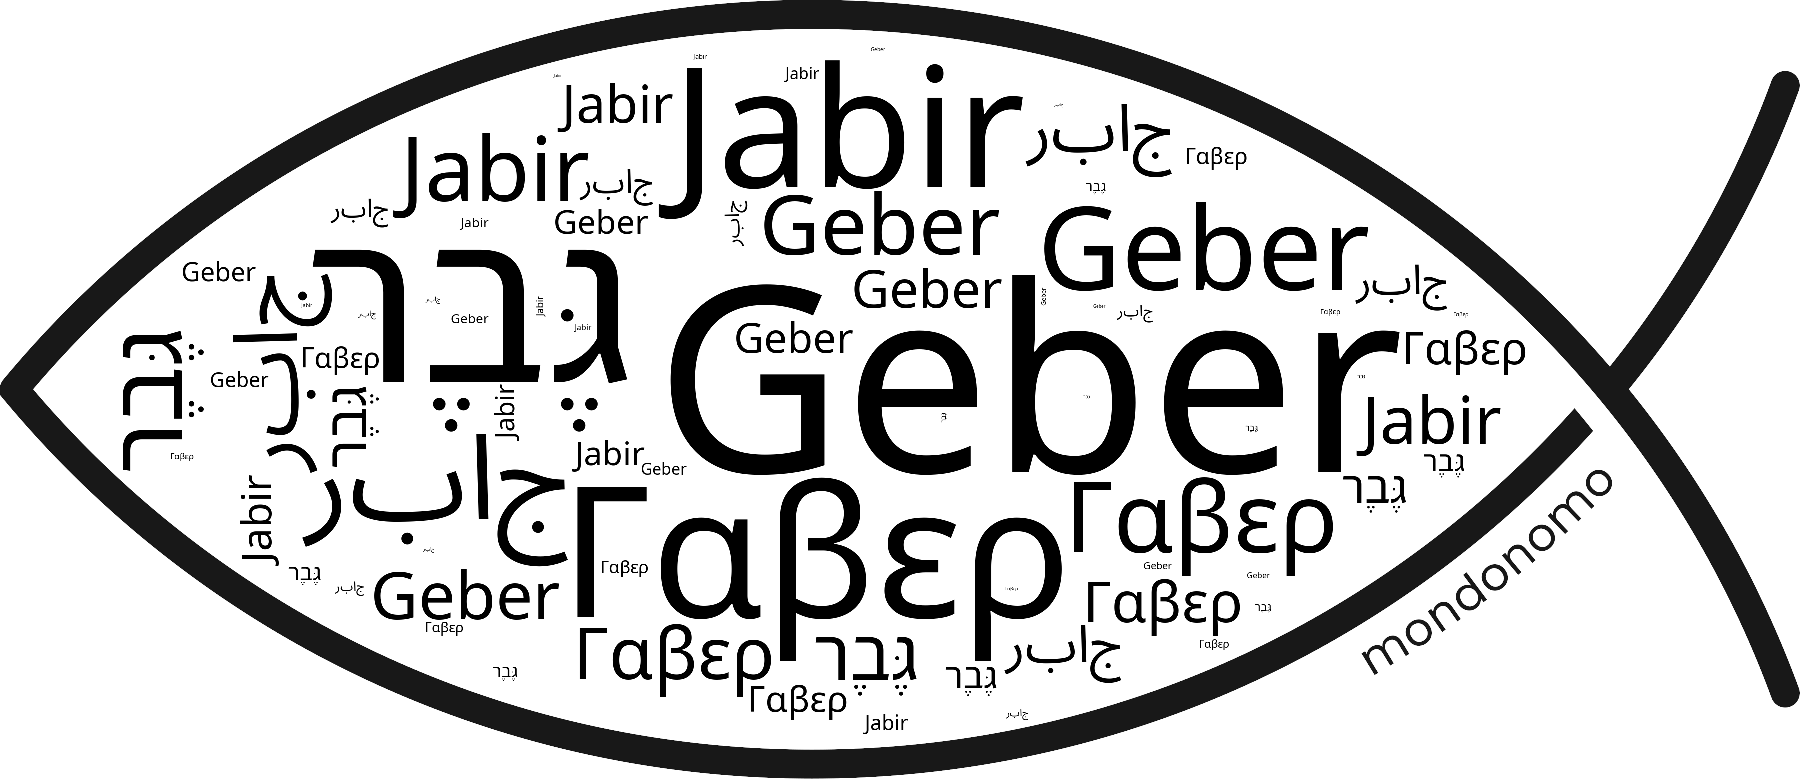 Name Geber in the world's Bibles